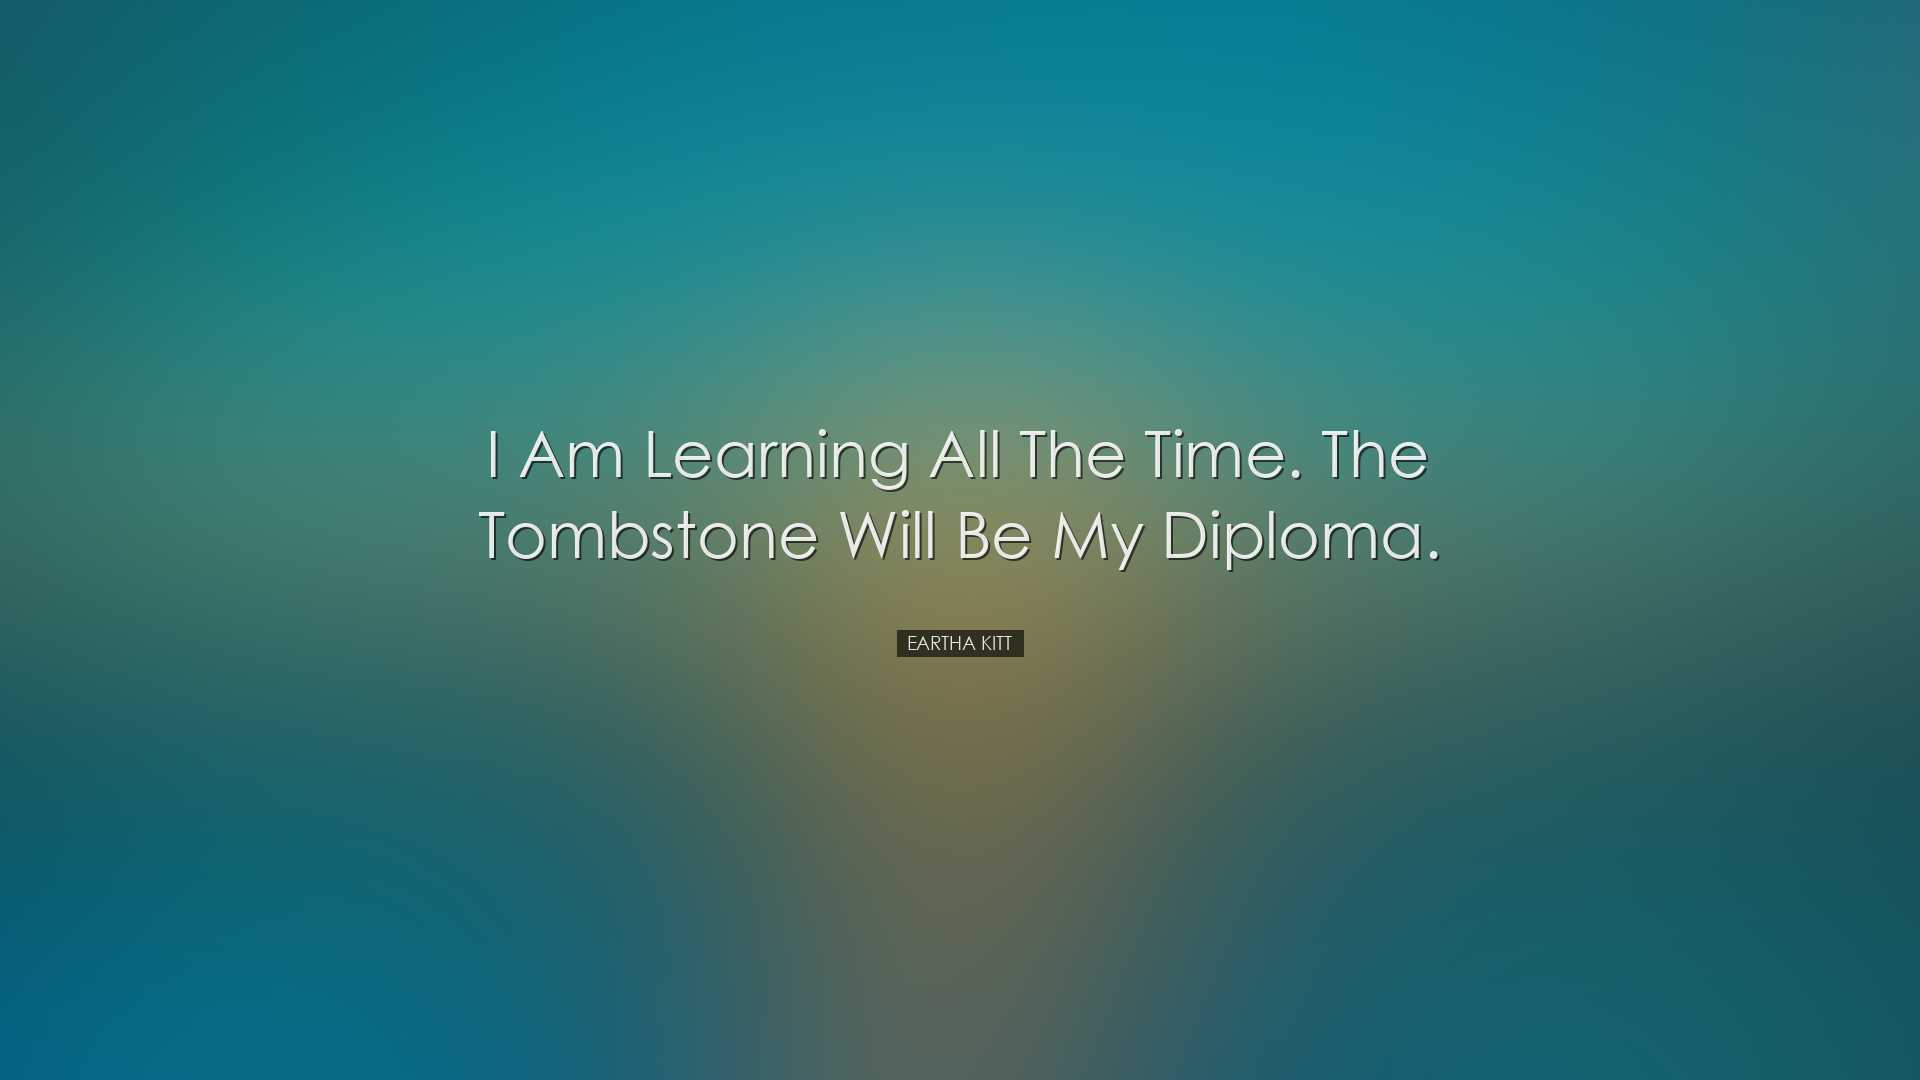 I am learning all the time. The tombstone will be my diploma. - Ea